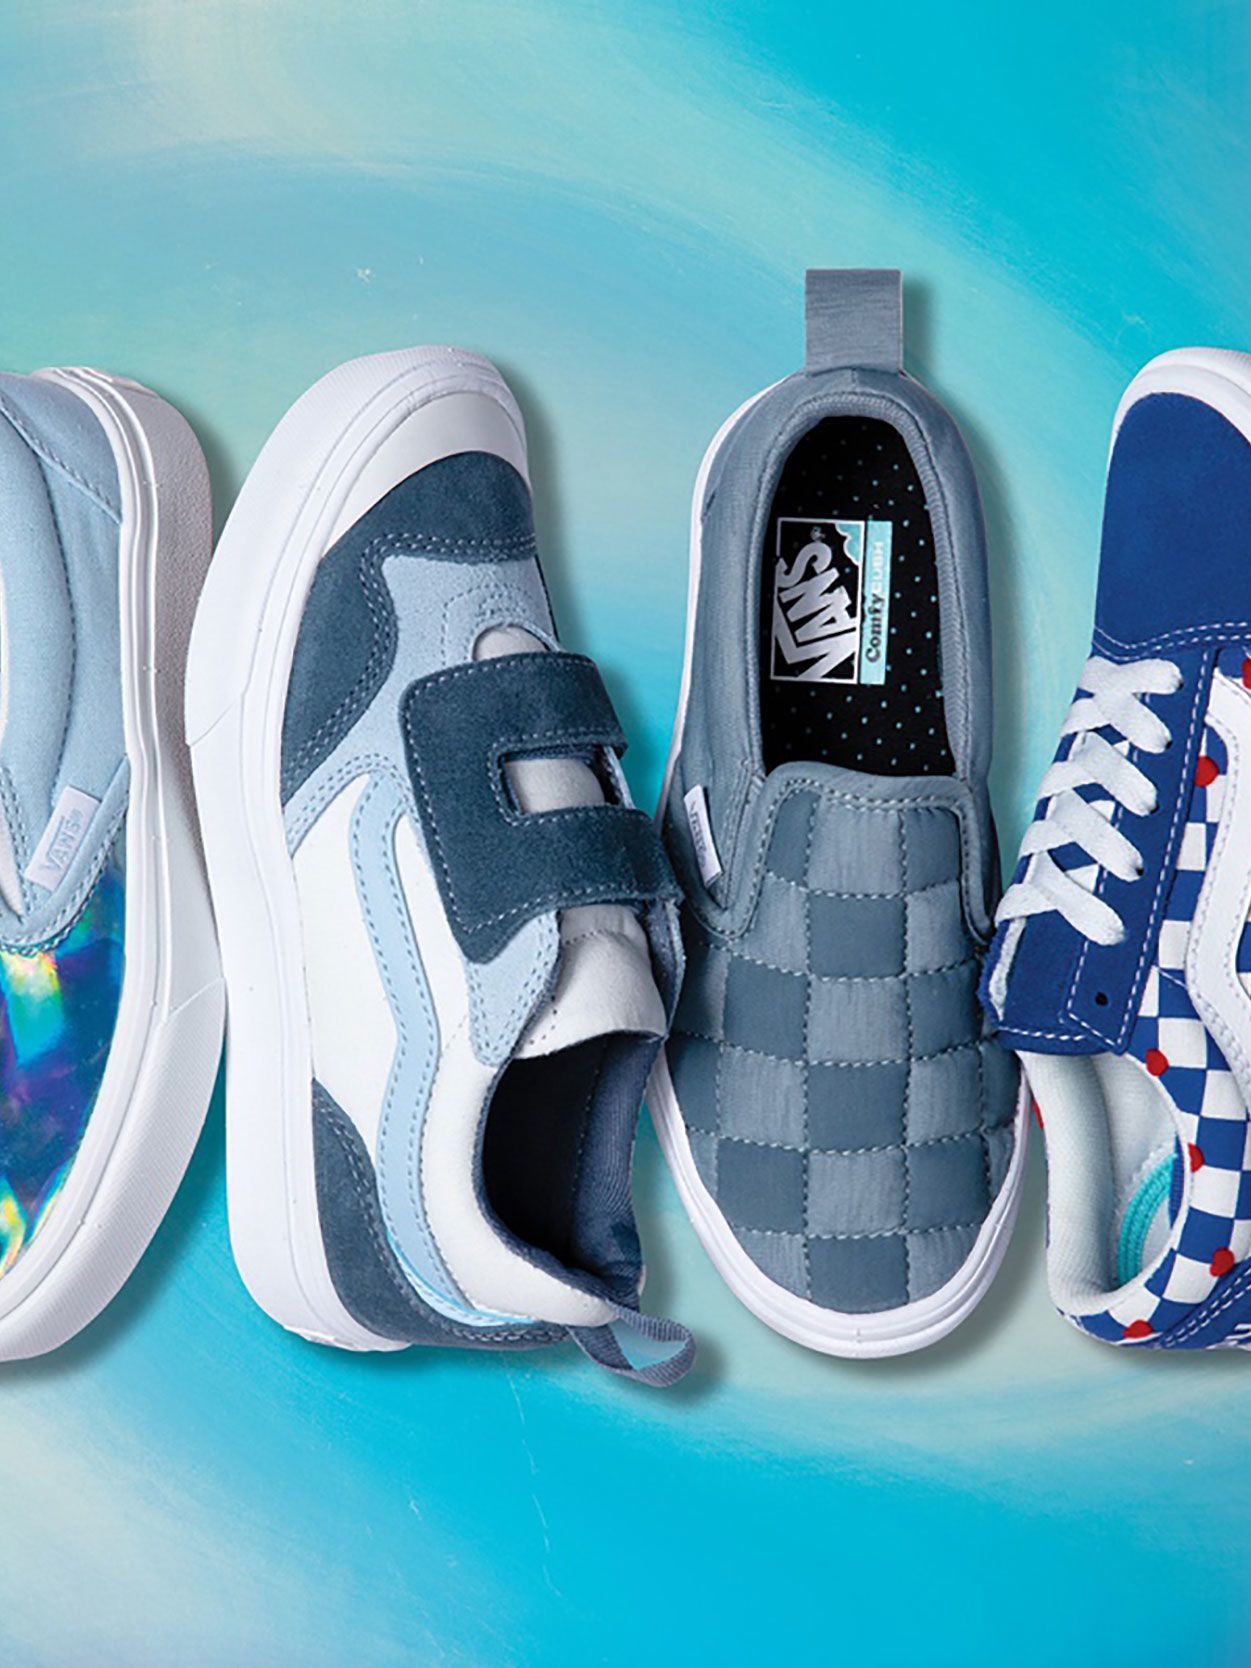 Vans releases new Autism Awareness Collection designed with  sensory-inclusive elements | CNN